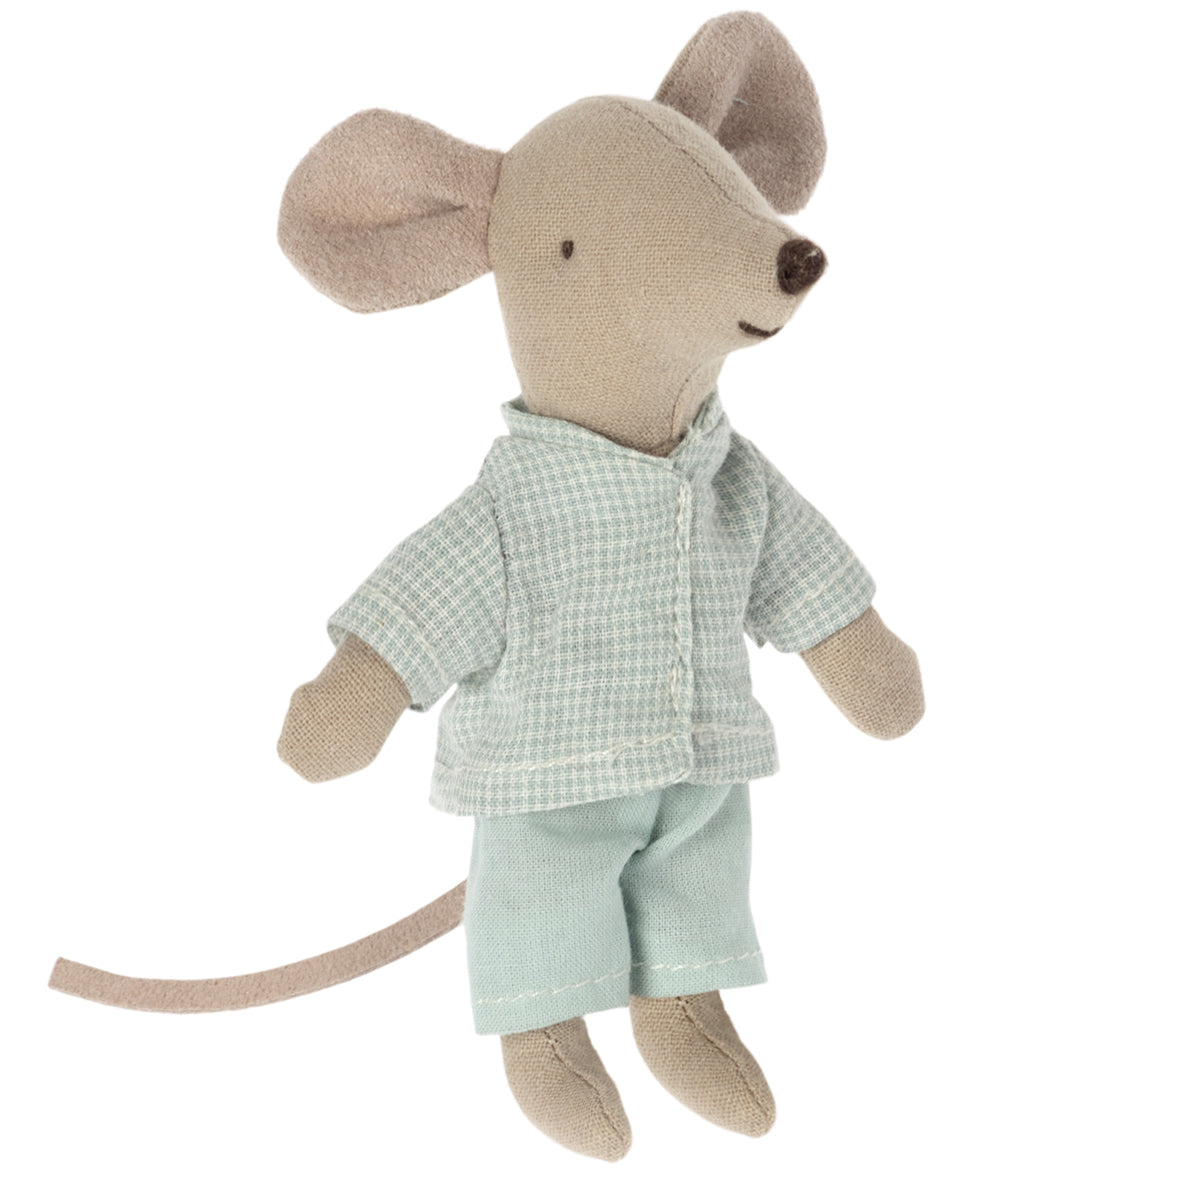 Pyjamas for little brother mouse